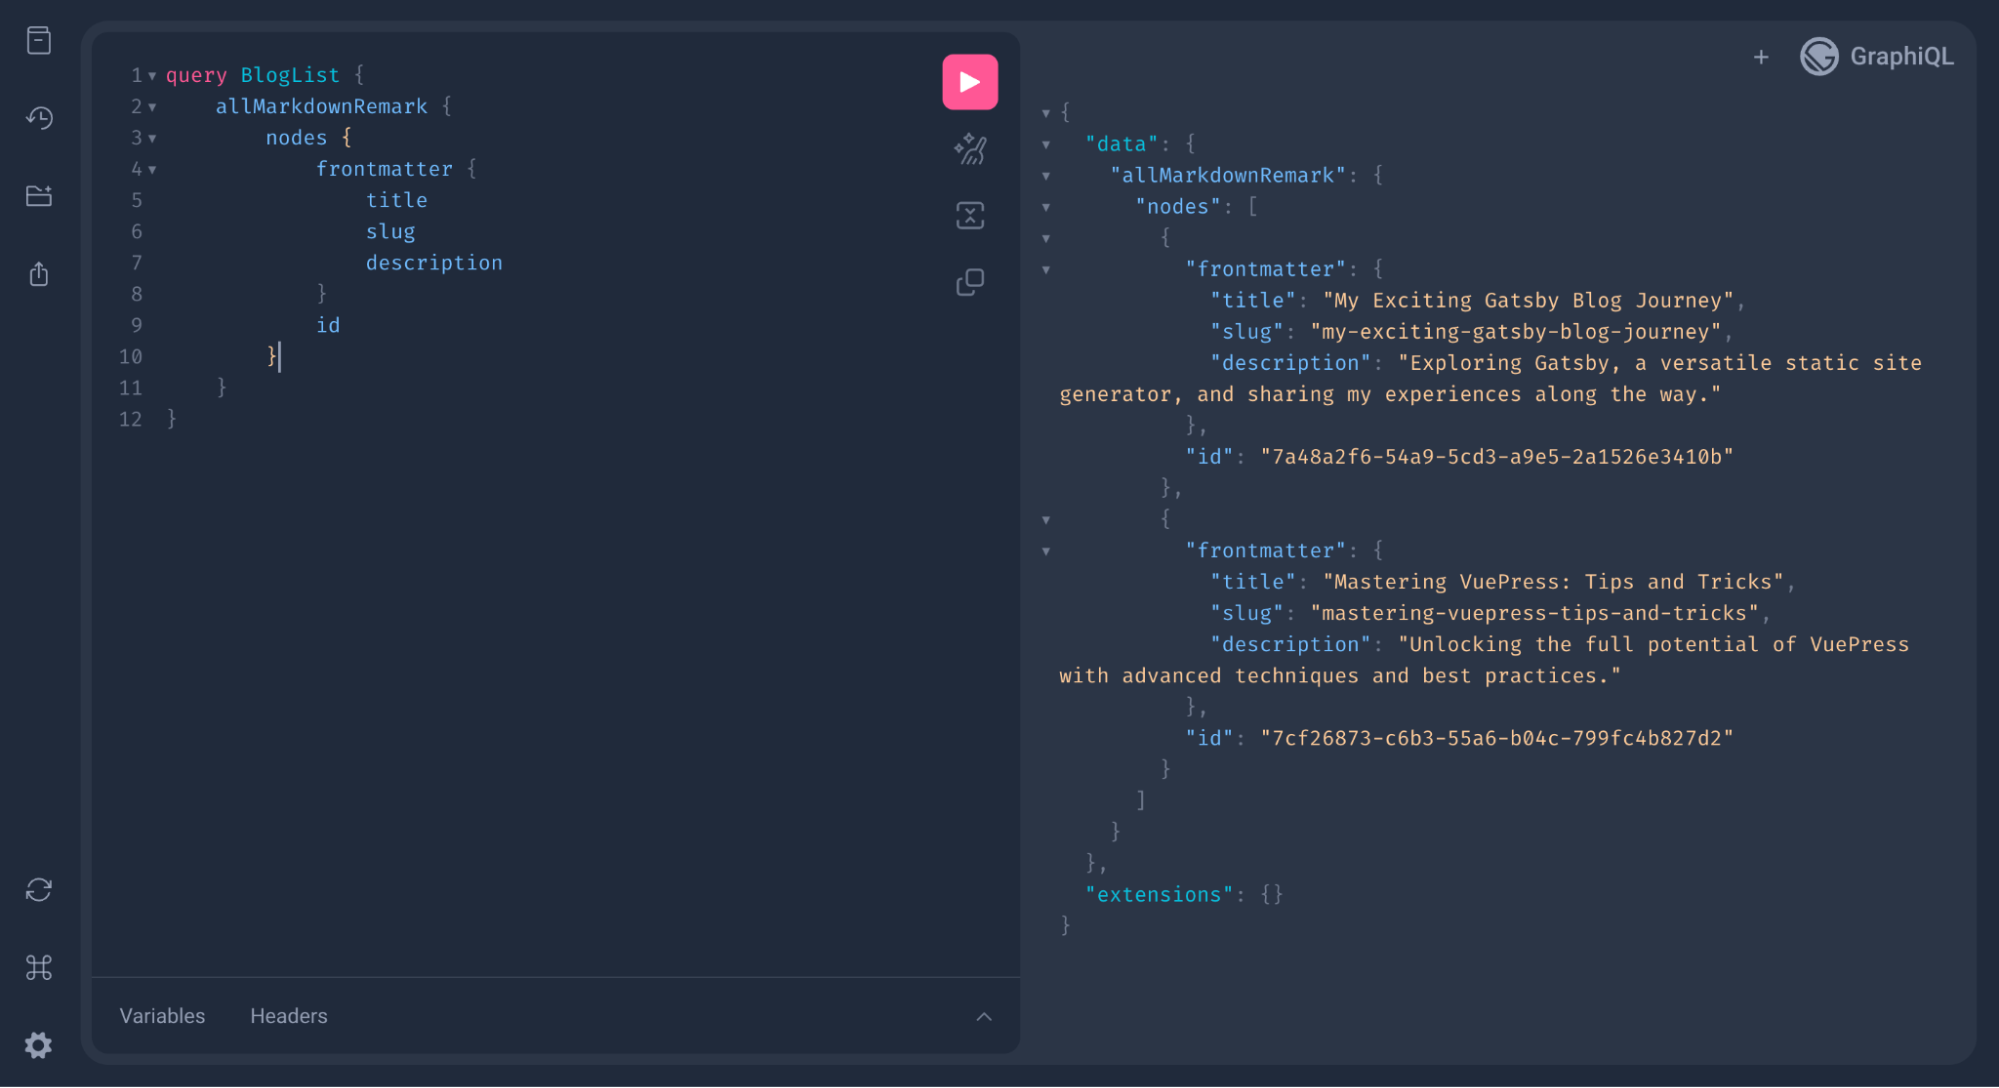 Using the GraphiQL playground to get markdown information